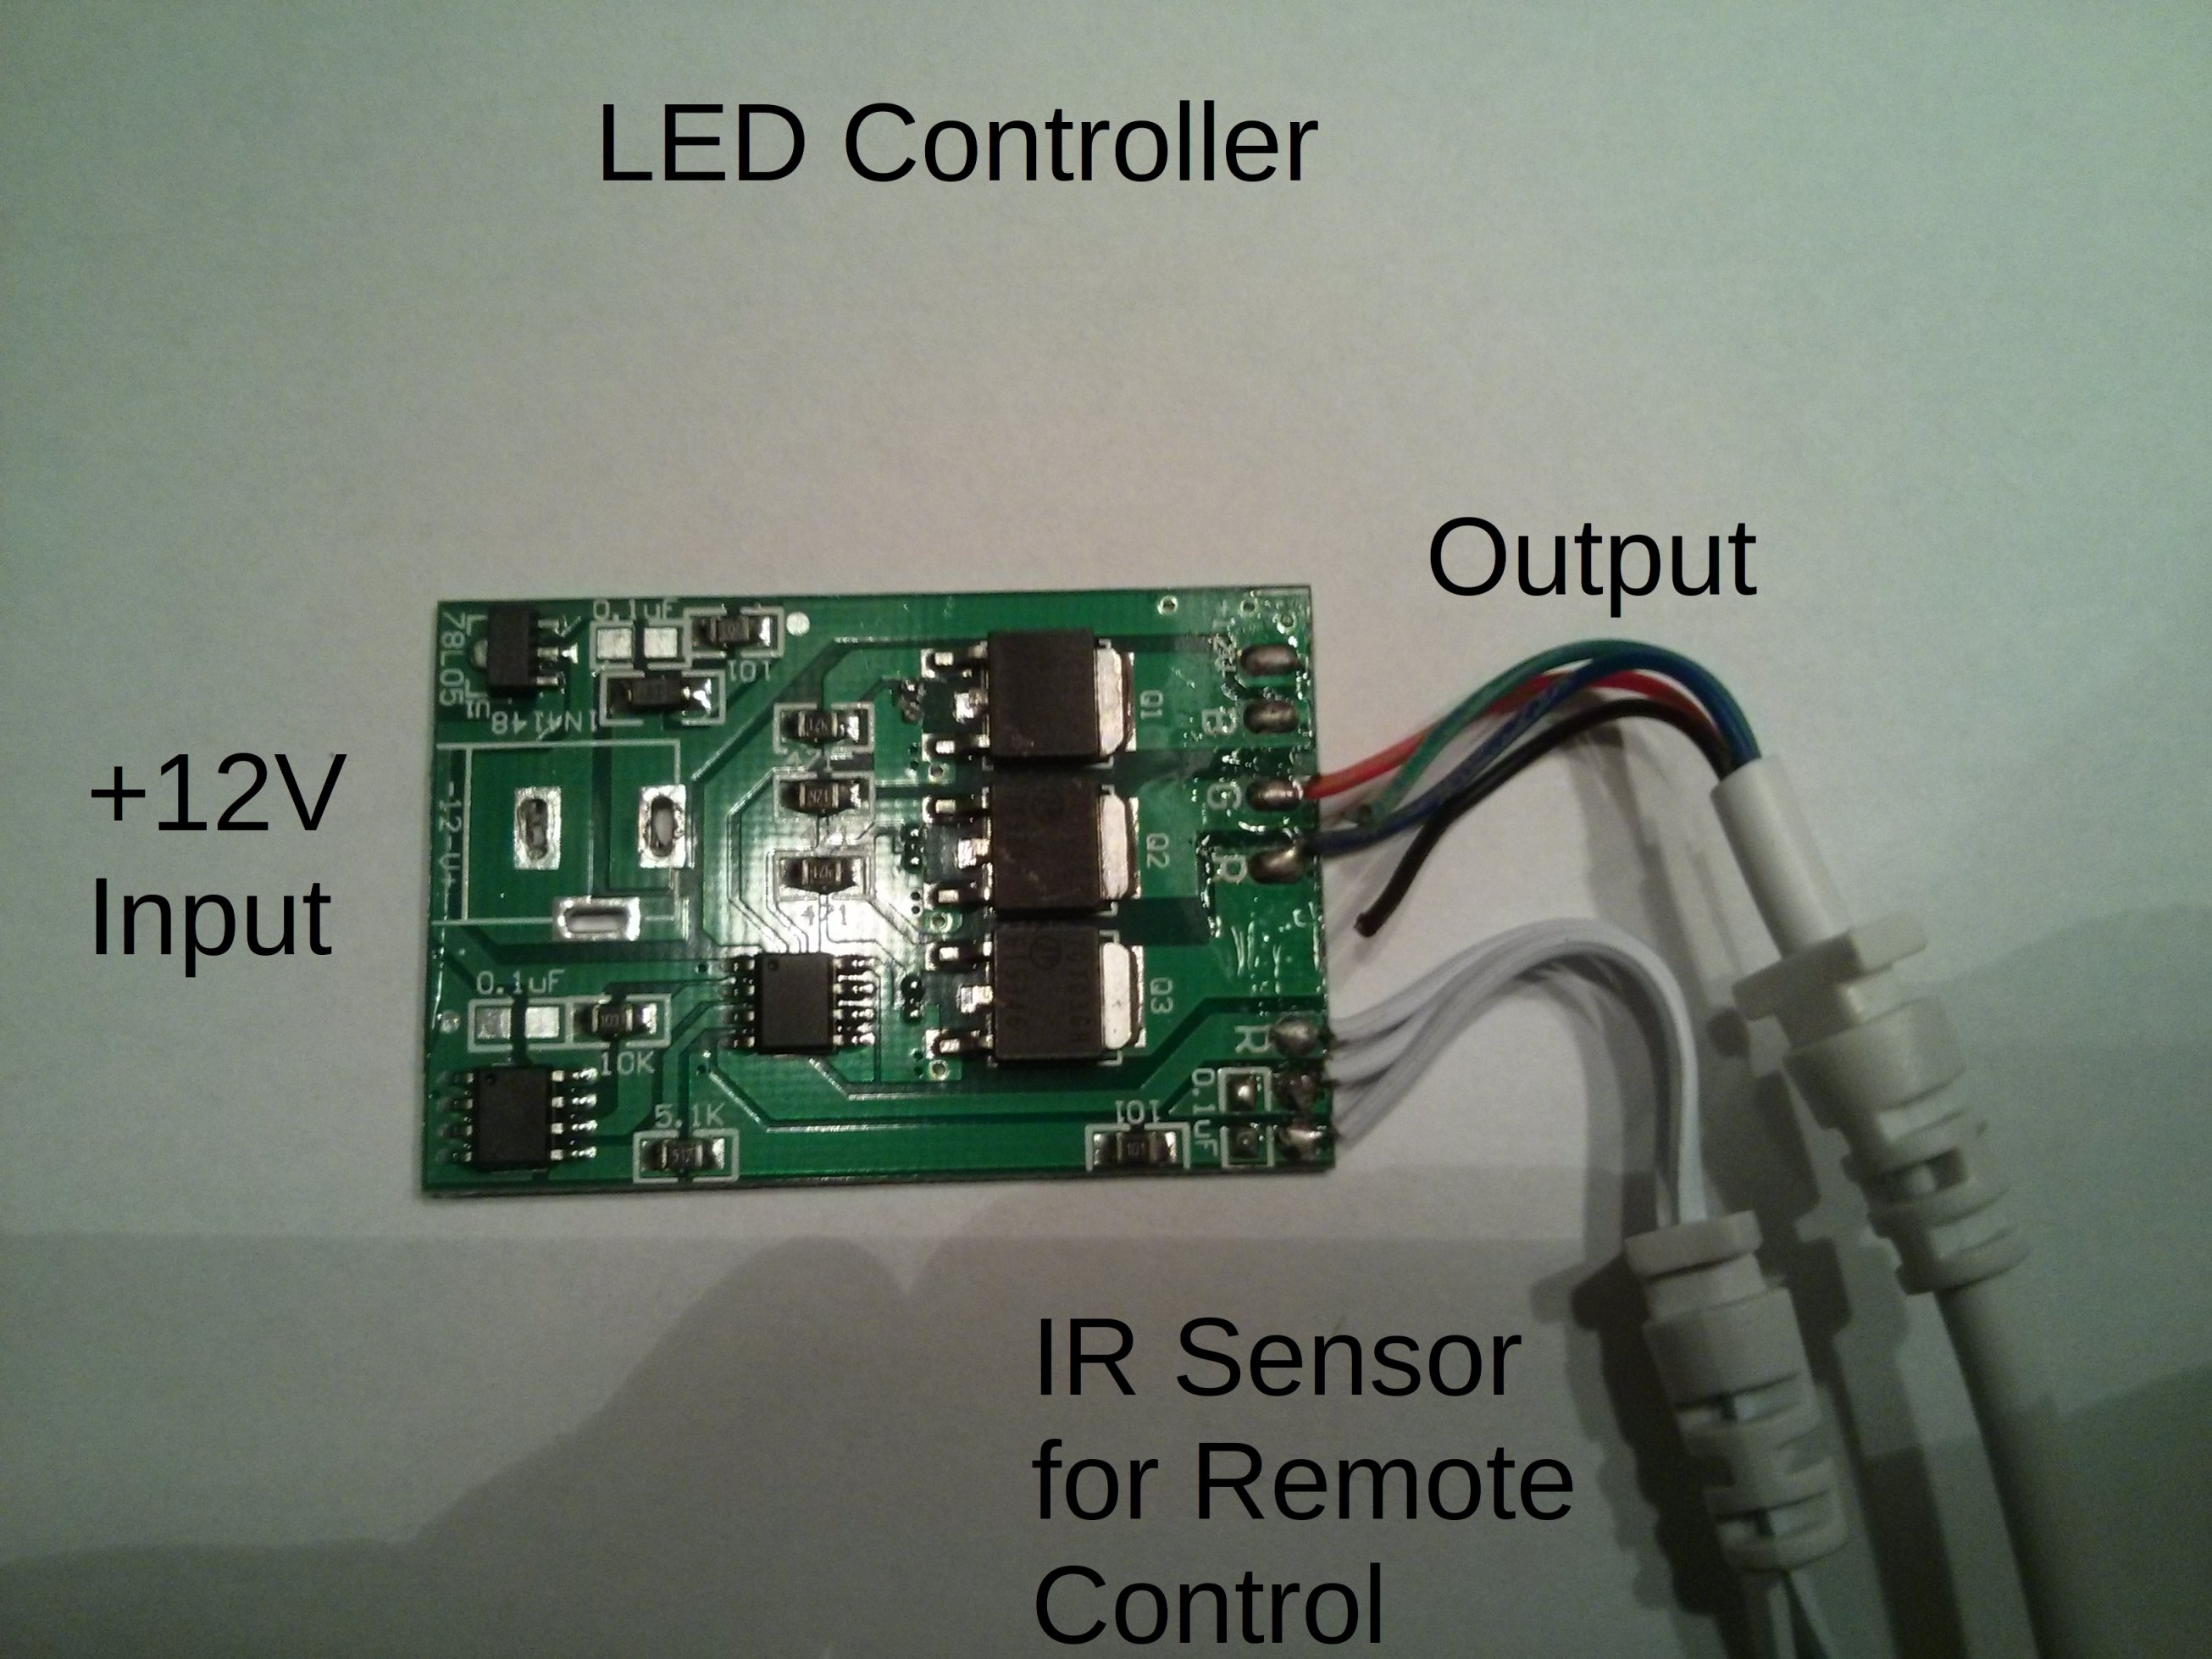 LED controller